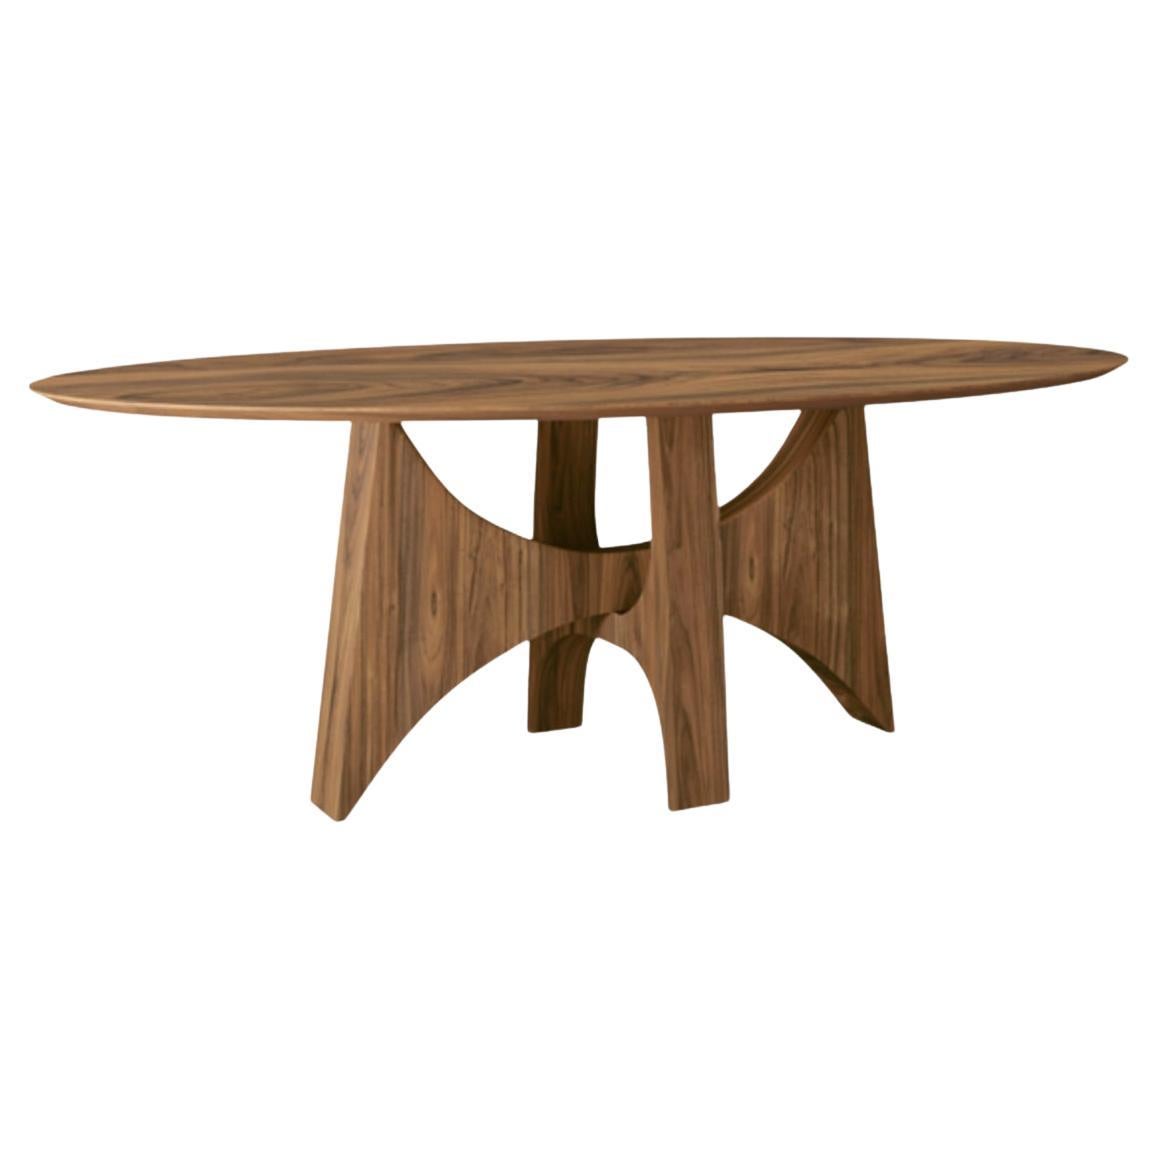 "Planalto" oval dining table in natural walnut wood For Sale